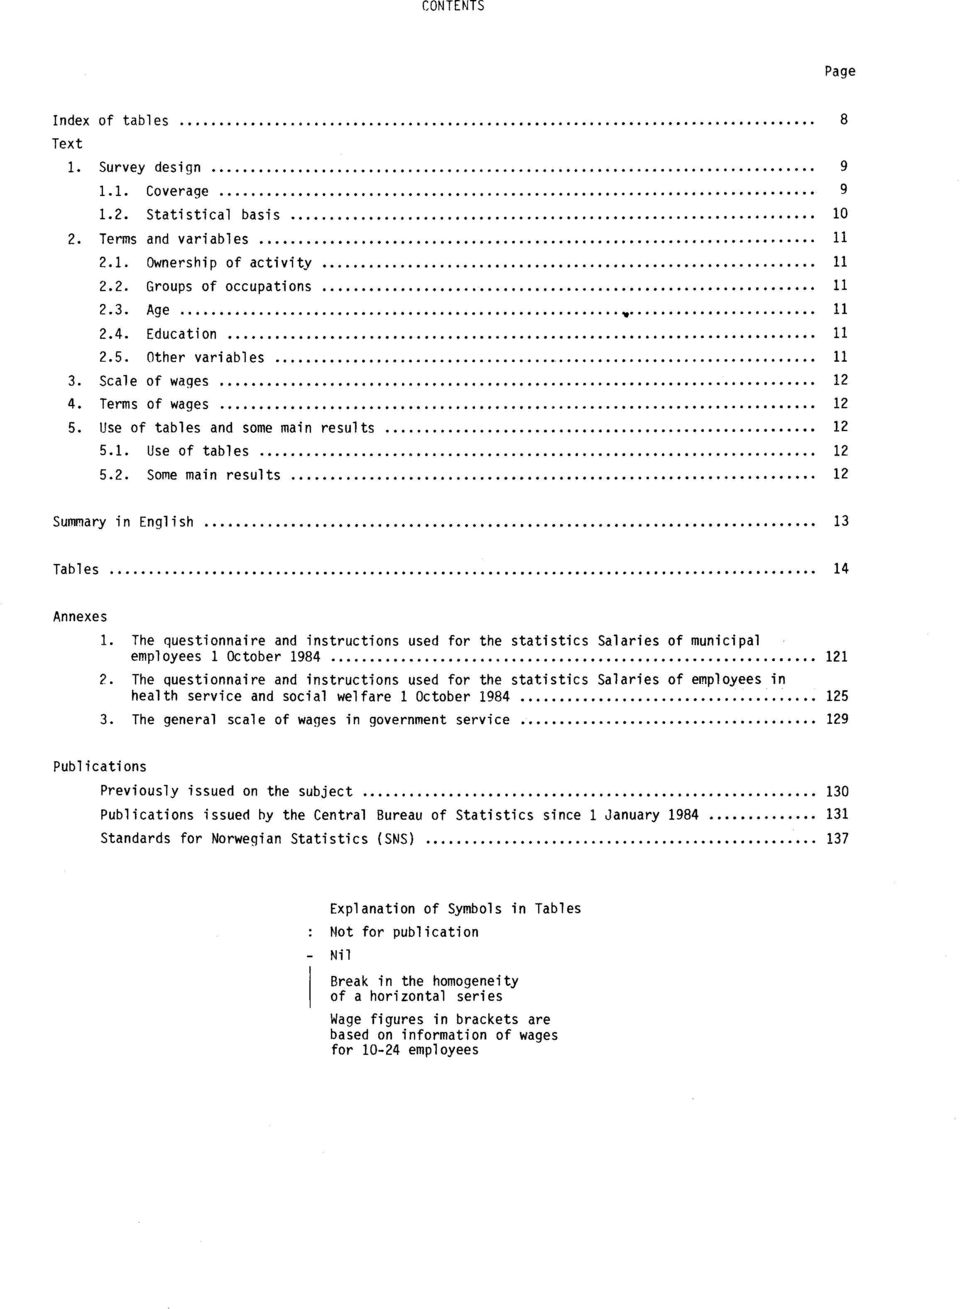 The questionnaire and instructions used for the statistics Salaries of municipal employees 1 October 1984 121 2.